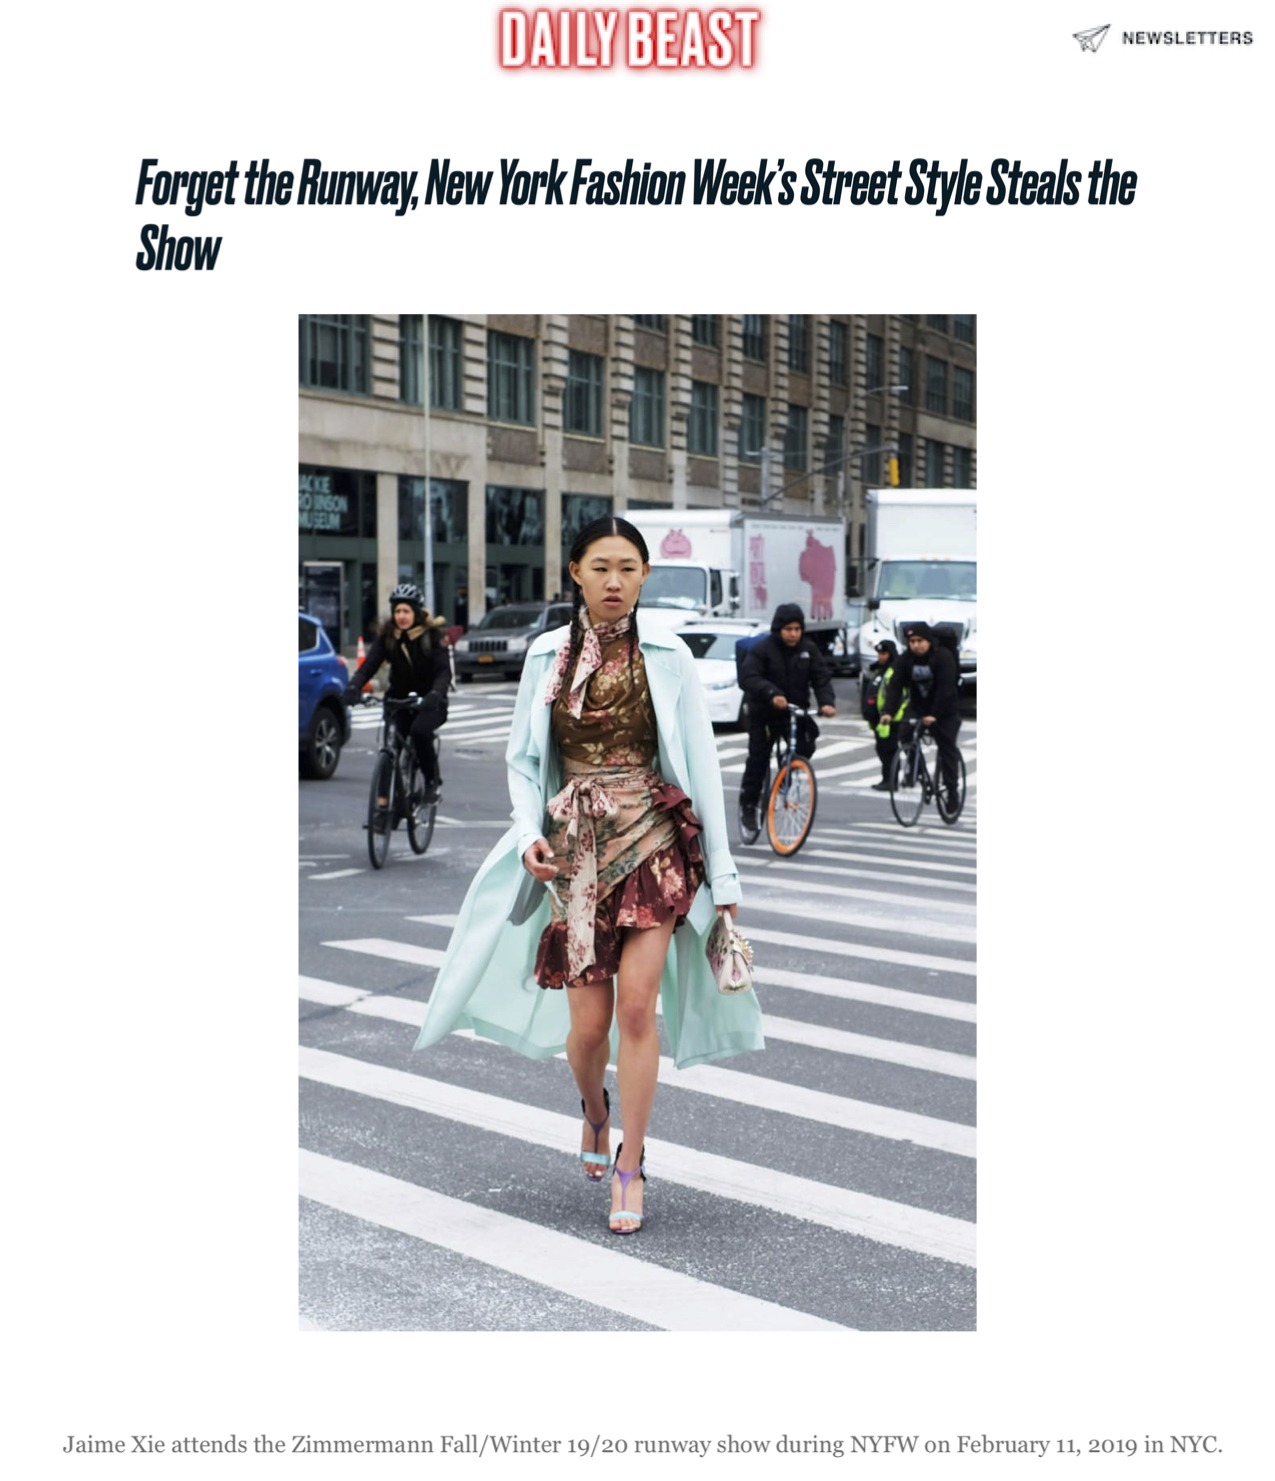 Daily Beast: Forget the Runway, New York Fashion Week’s Street Style Steals the Show